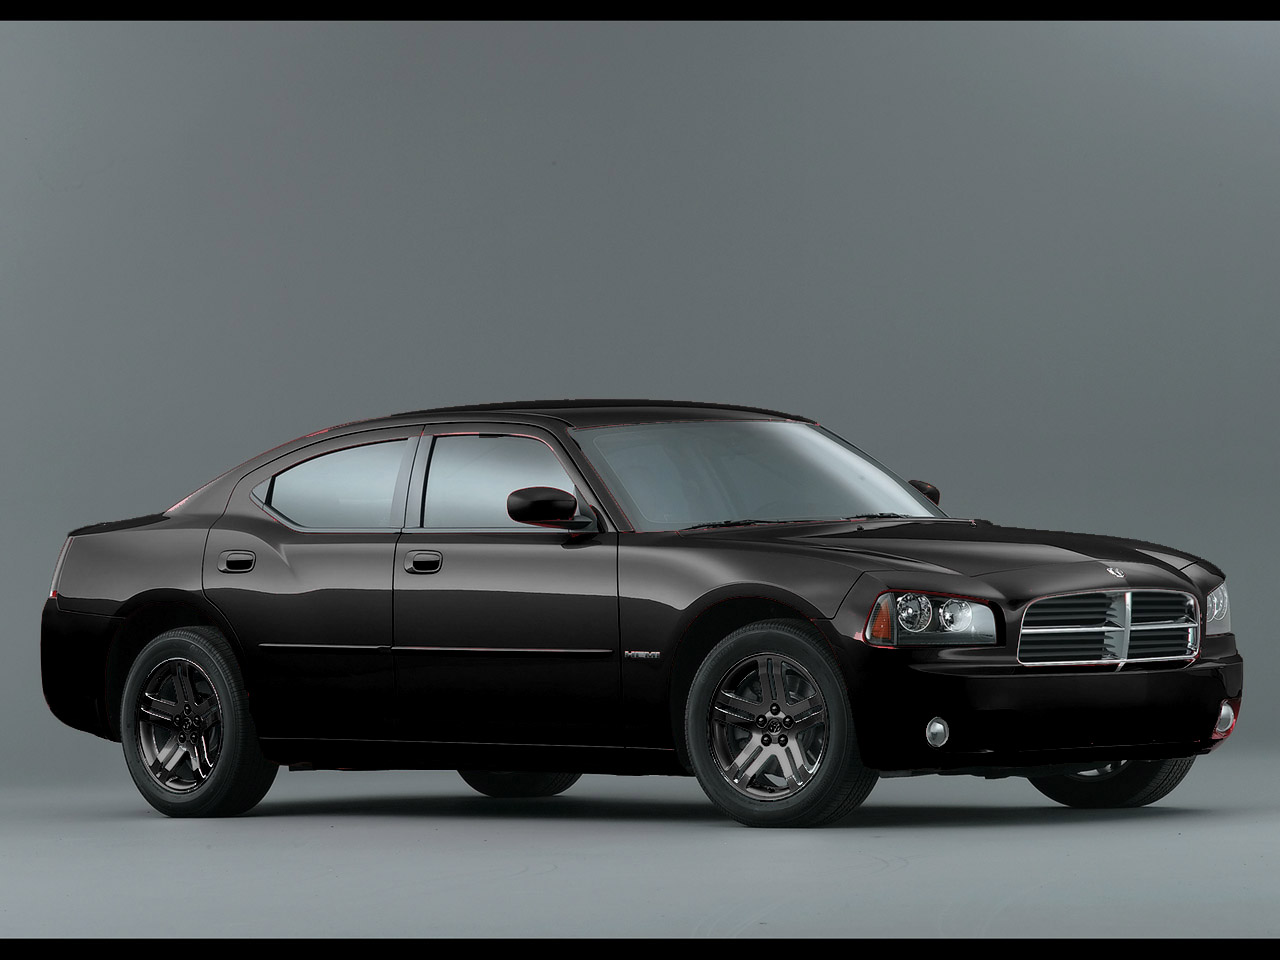 Black Dodge Charger Wallpaper 4306 Hd Wallpapers in Cars   Imagesci